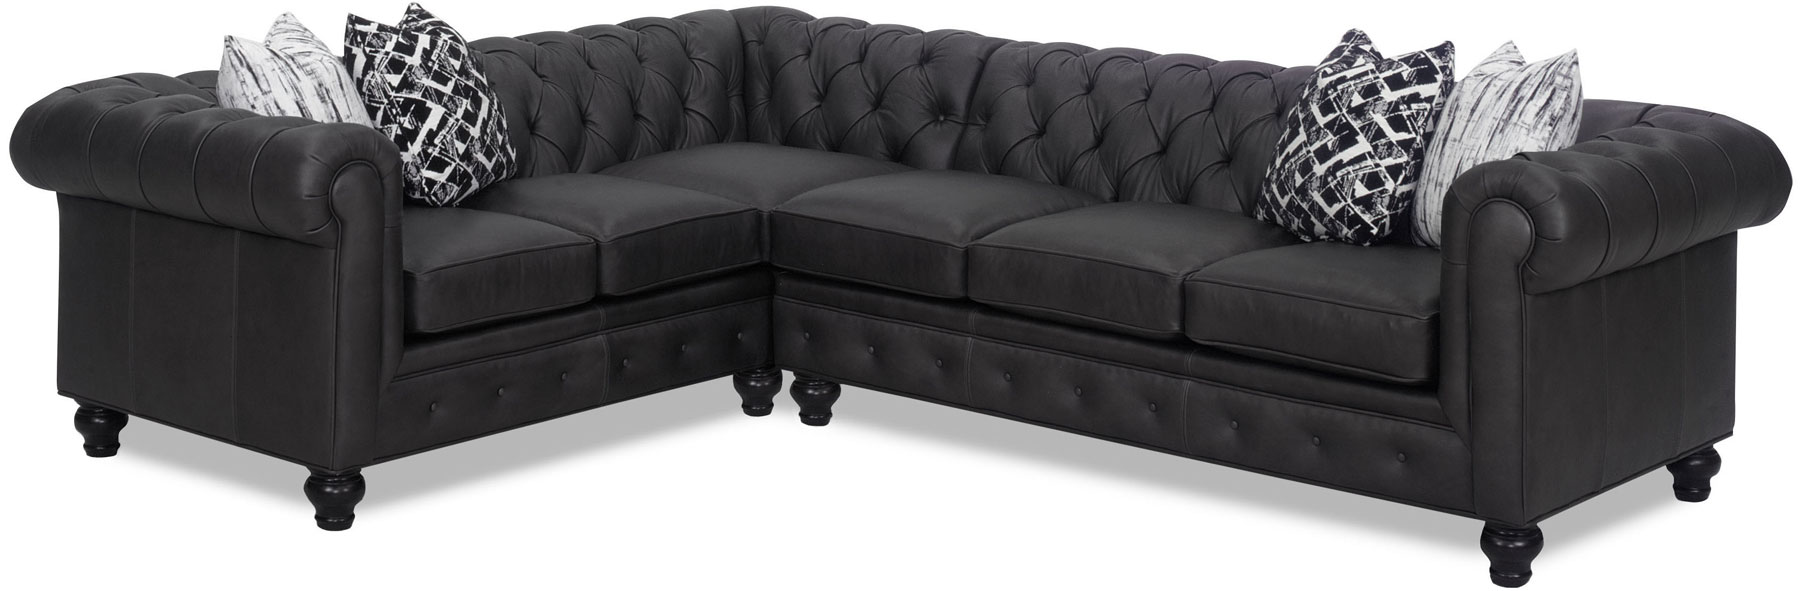 Temple Furniture 7500 Chesterfield Sectional